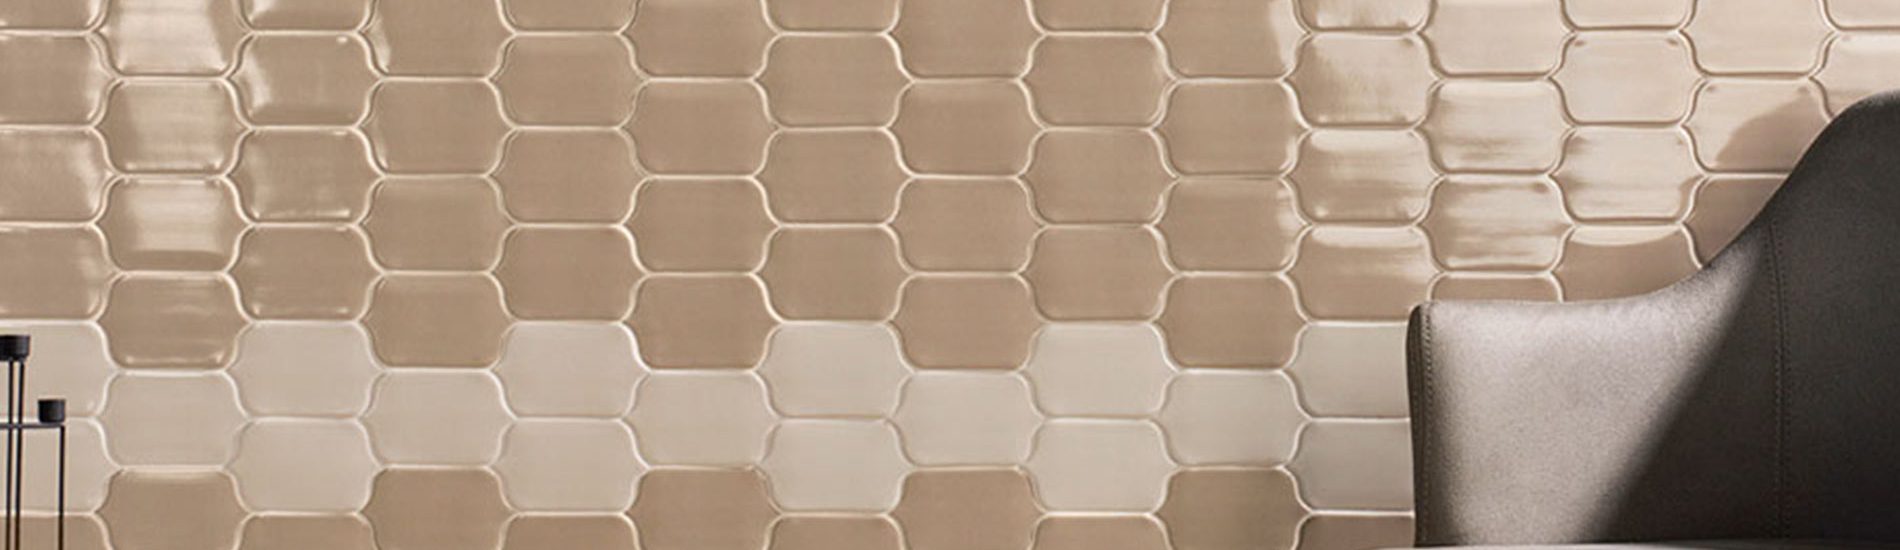 banner-riad-natucer-wall-tile-extruded